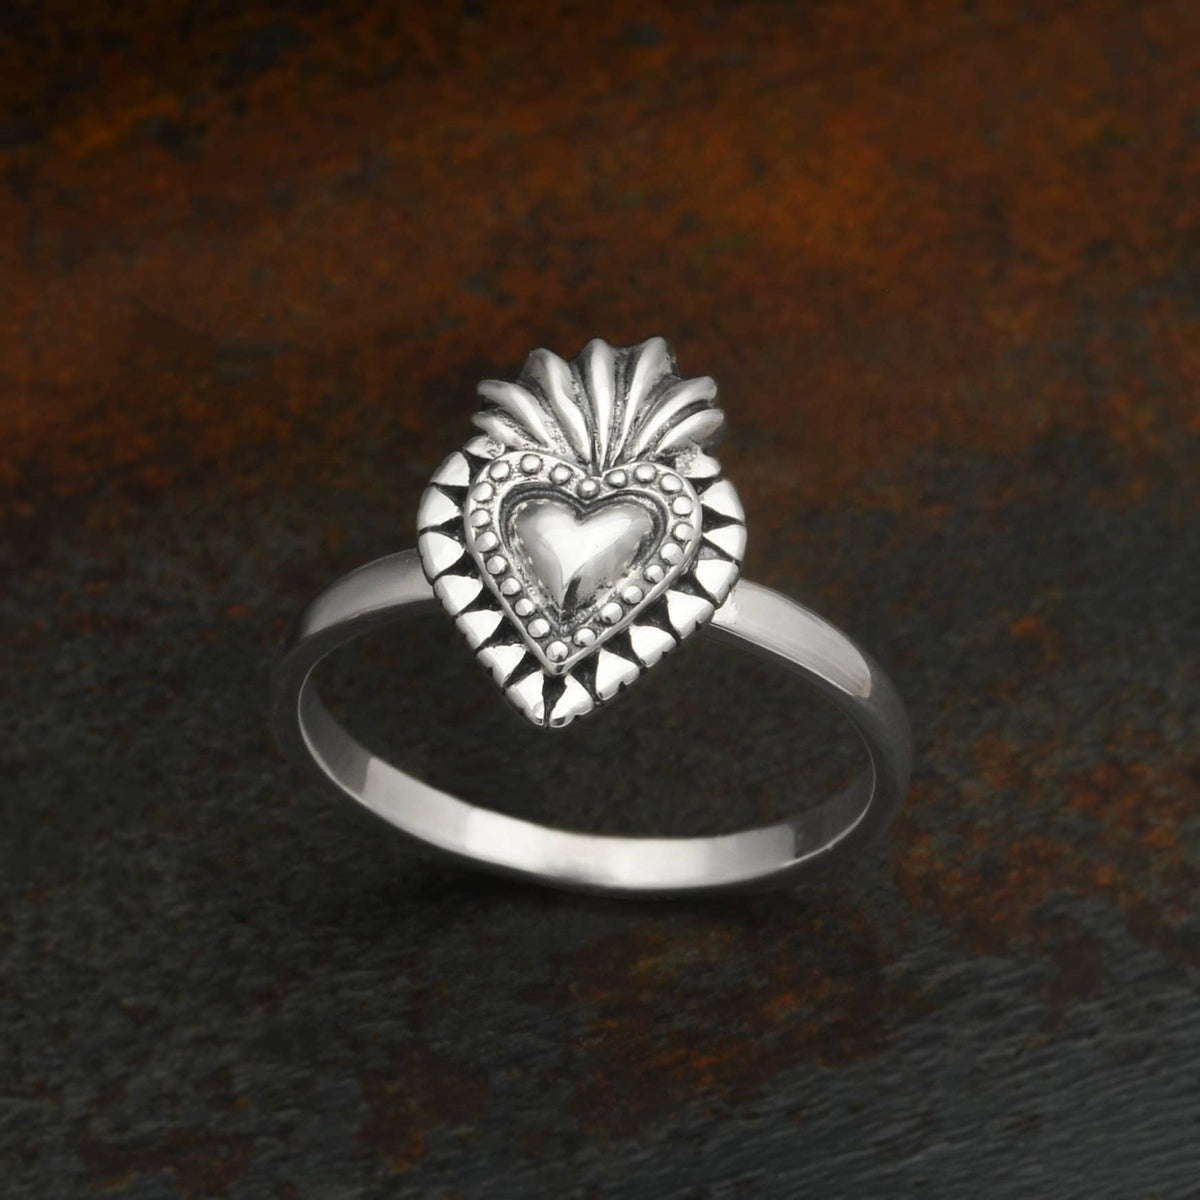 This sterling silver flaming heart ring is both fierce and romantic. Within the Catholic faith, the sacred heart is a medieval symbol of Christ&#39;s sacrifice. The sacred heart signifies the redeeming love of God as the source of illumination and happiness.